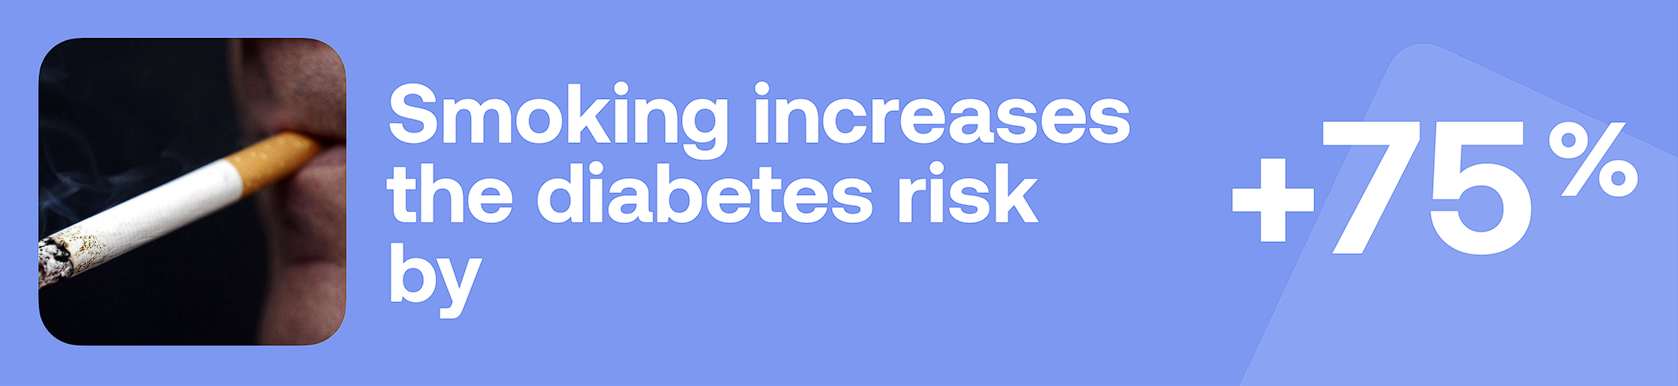 Smoking increases the diabetes risk by +75%